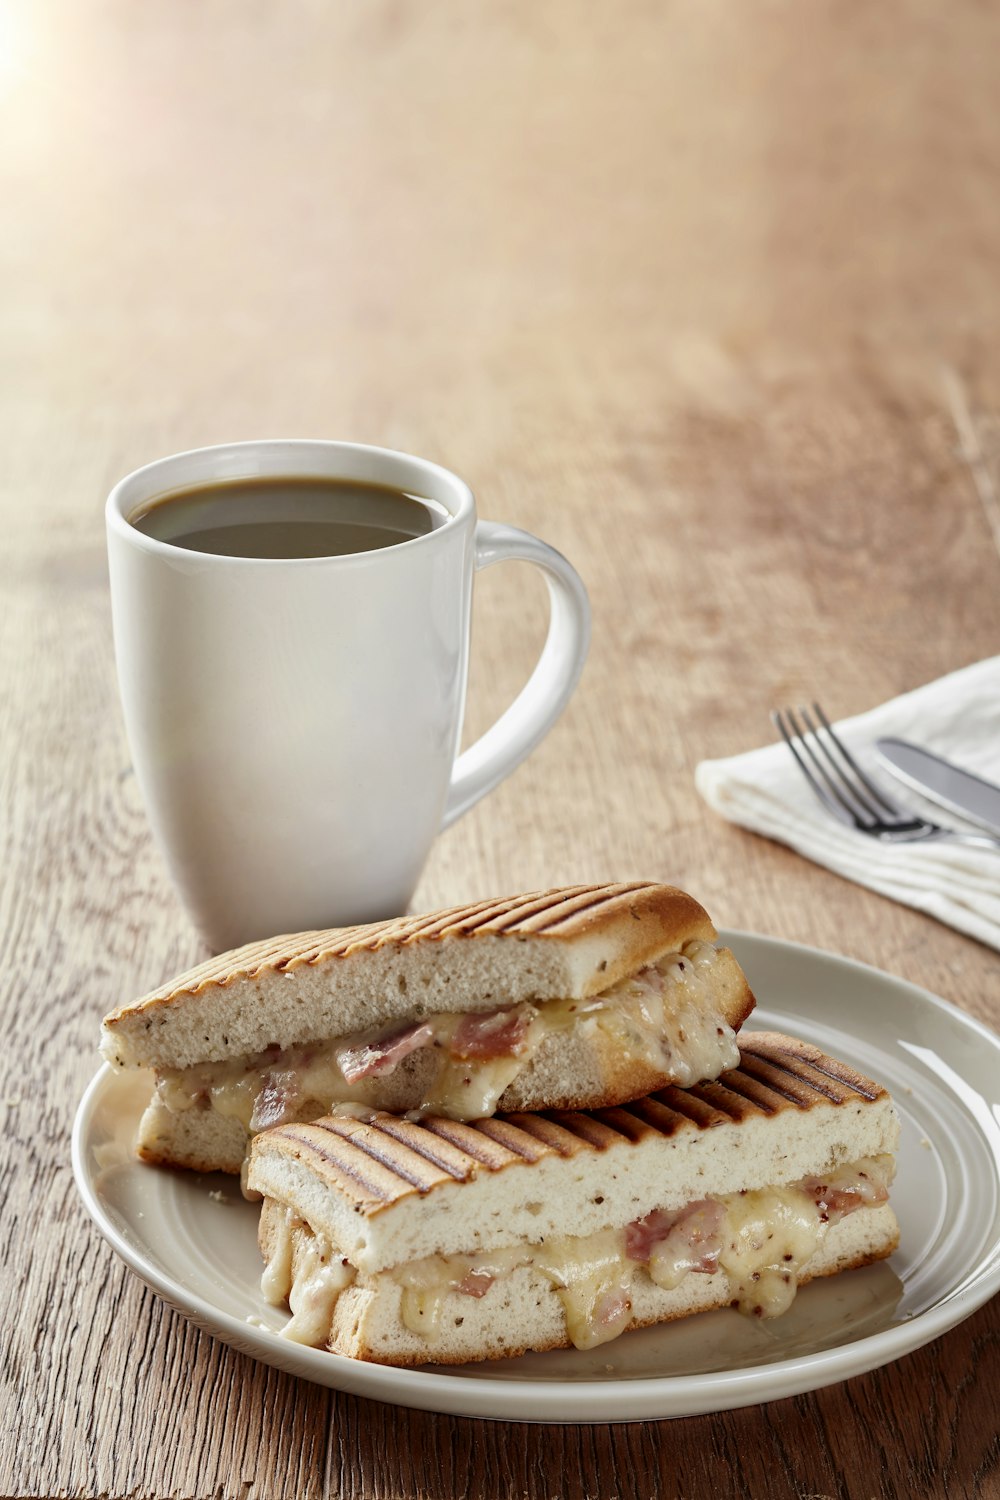 a plate with a sandwich and a cup of coffee